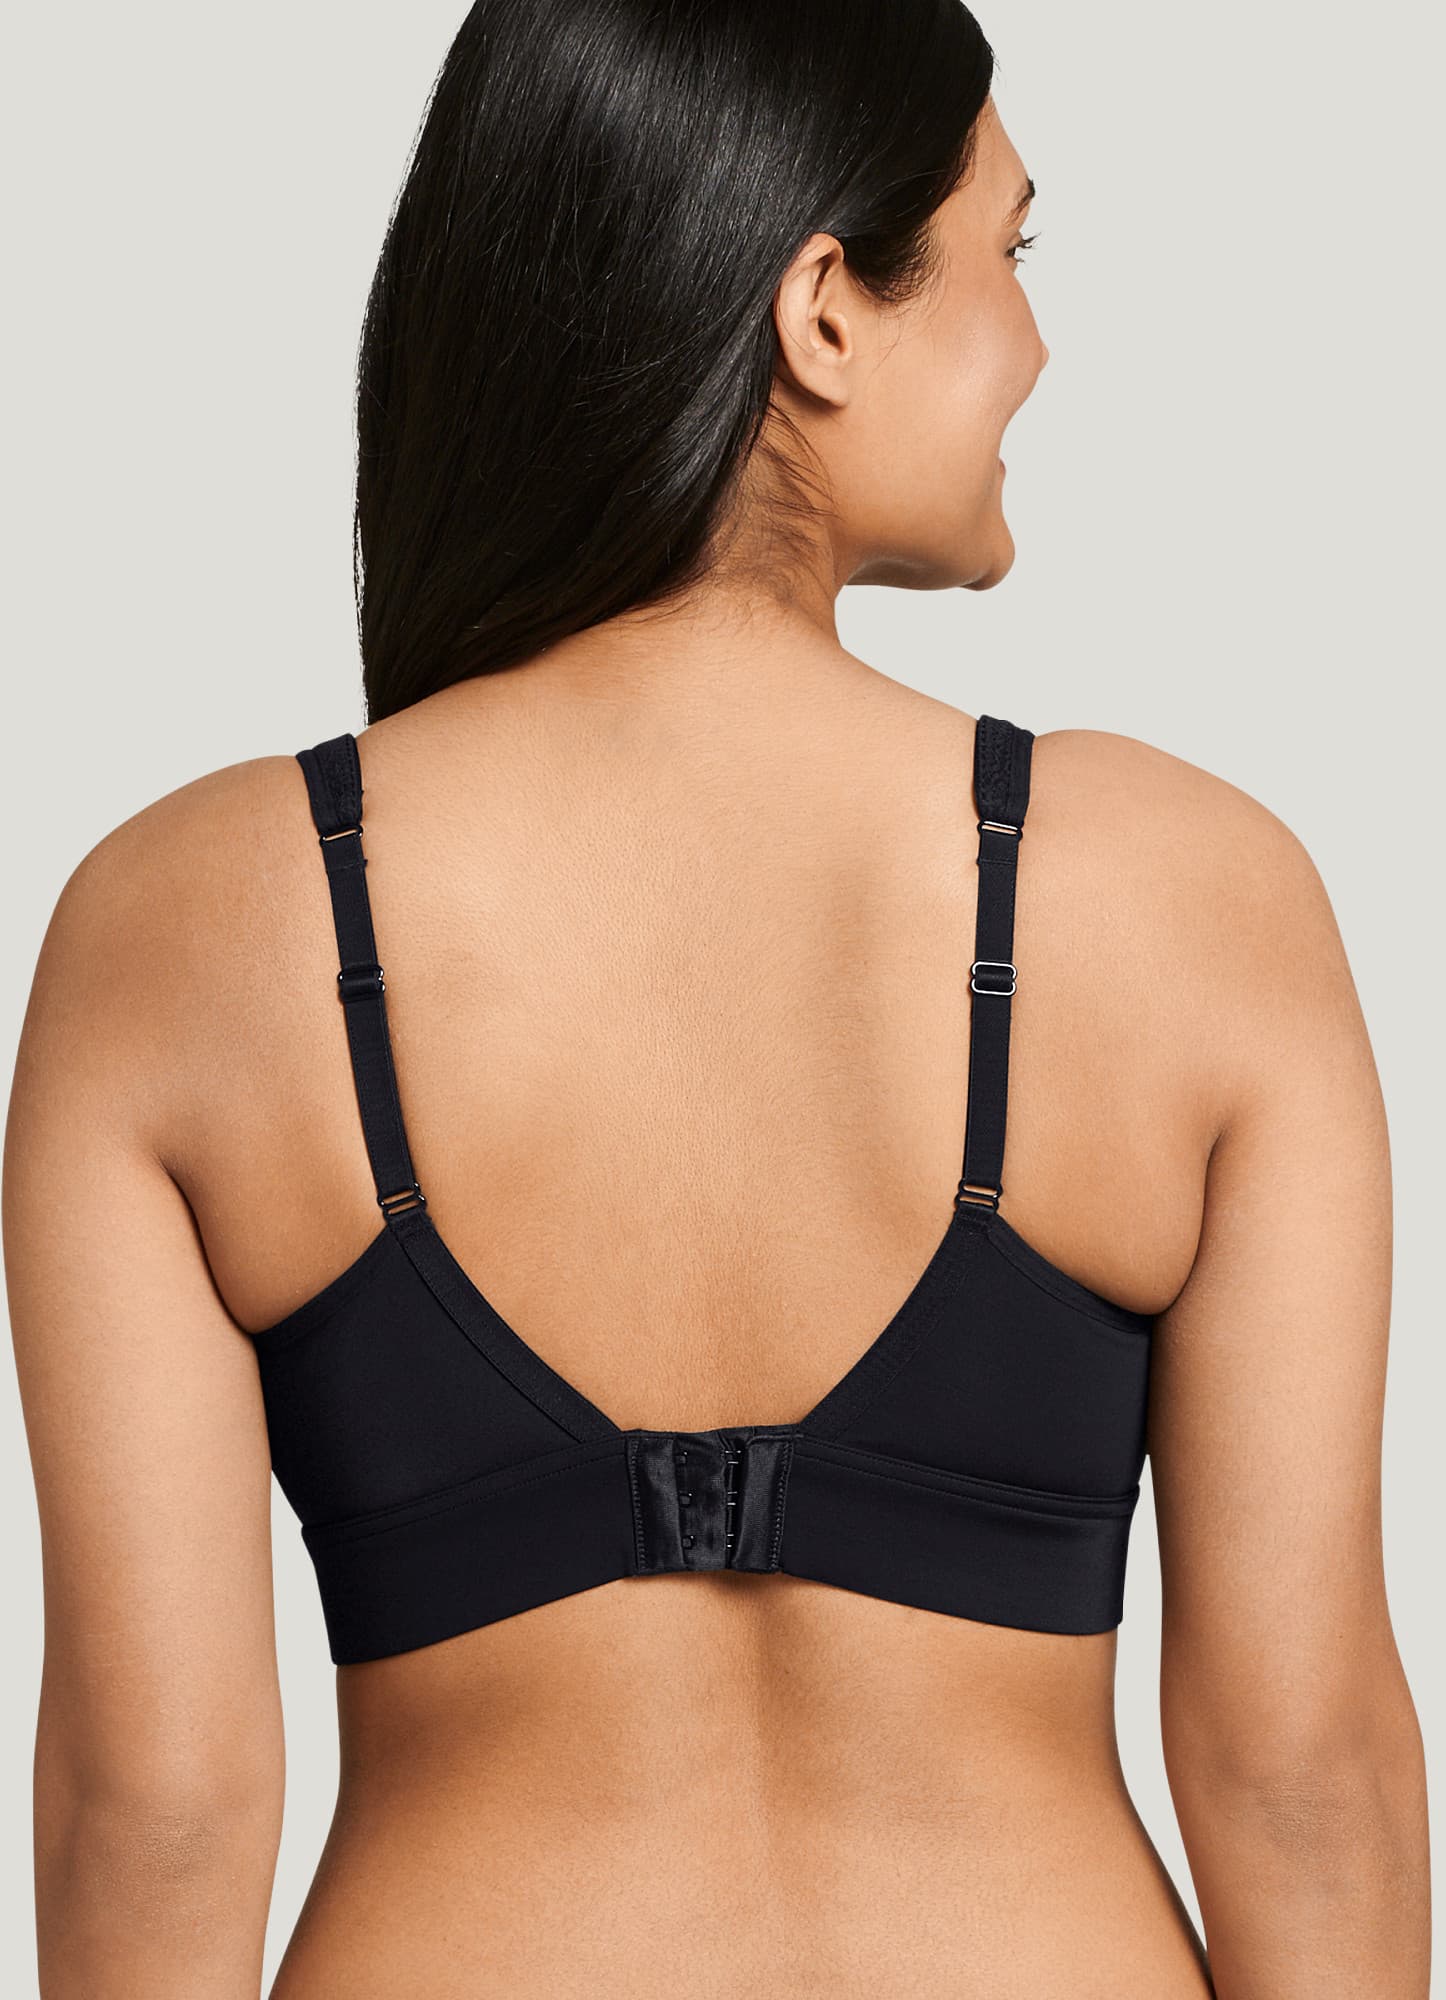 Jockey Women's Forever Fit V-Neck Molded Cup Lace Bra 